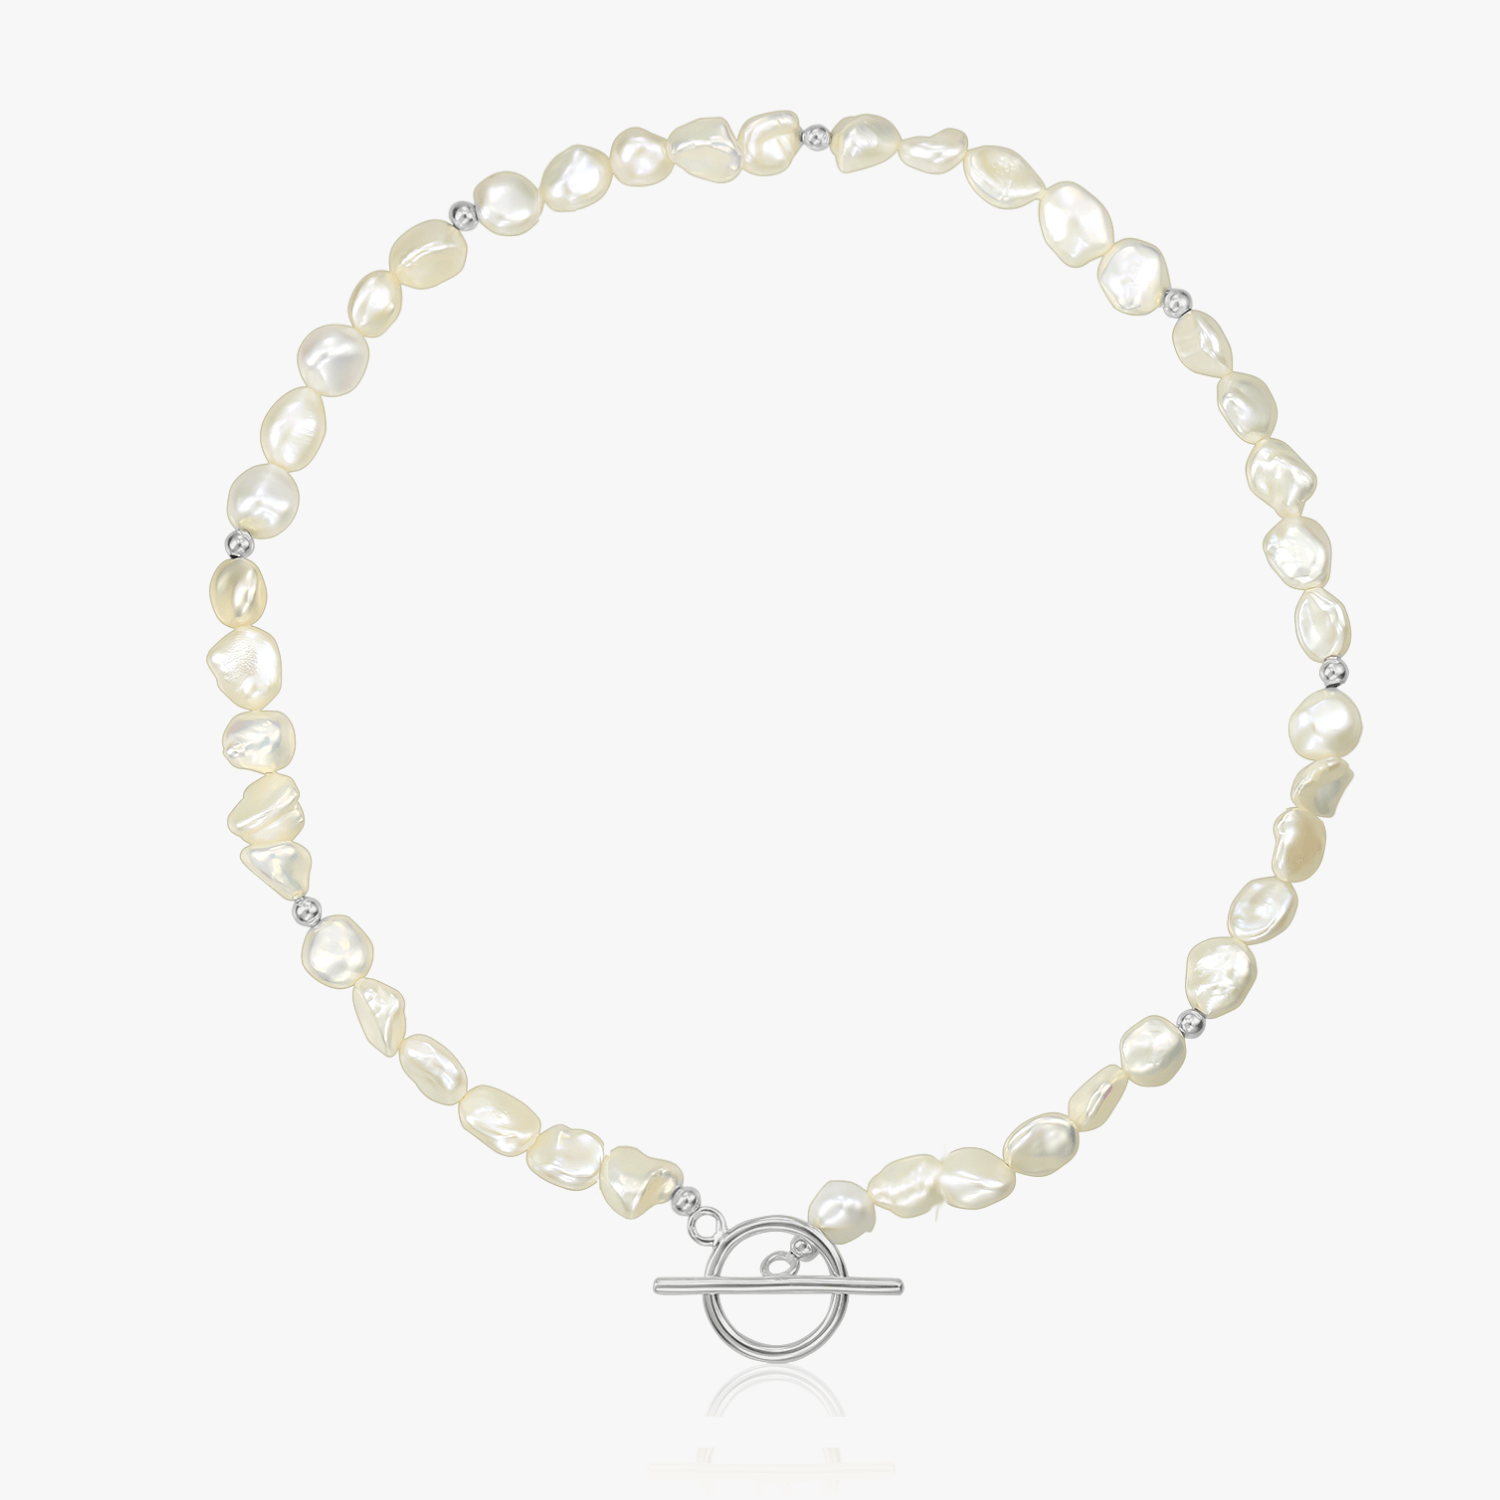 Silver Grace necklace - Natural pearls